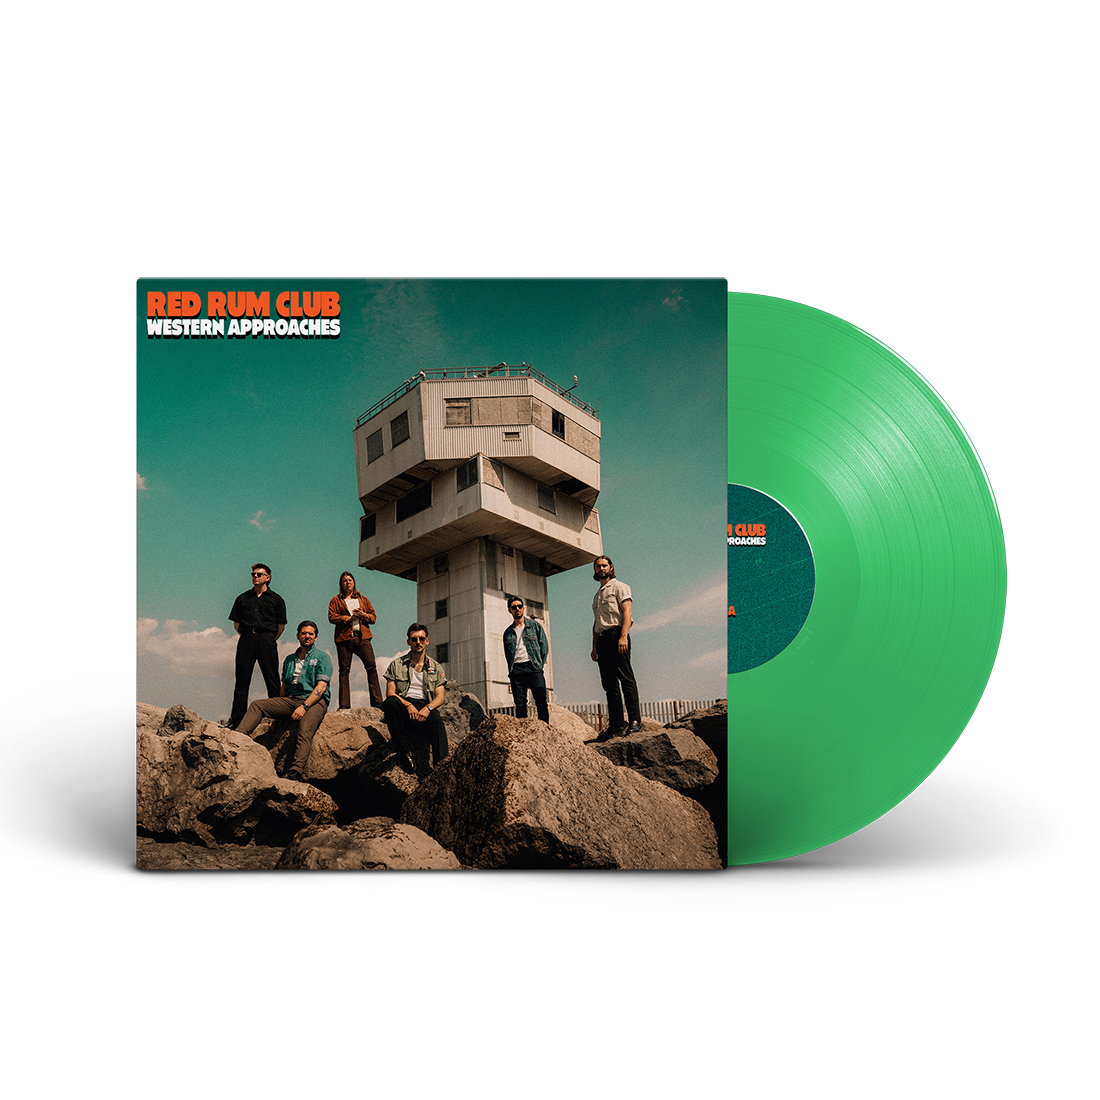 Red Rum Club - Western Approaches: Limited Green Vinyl LP